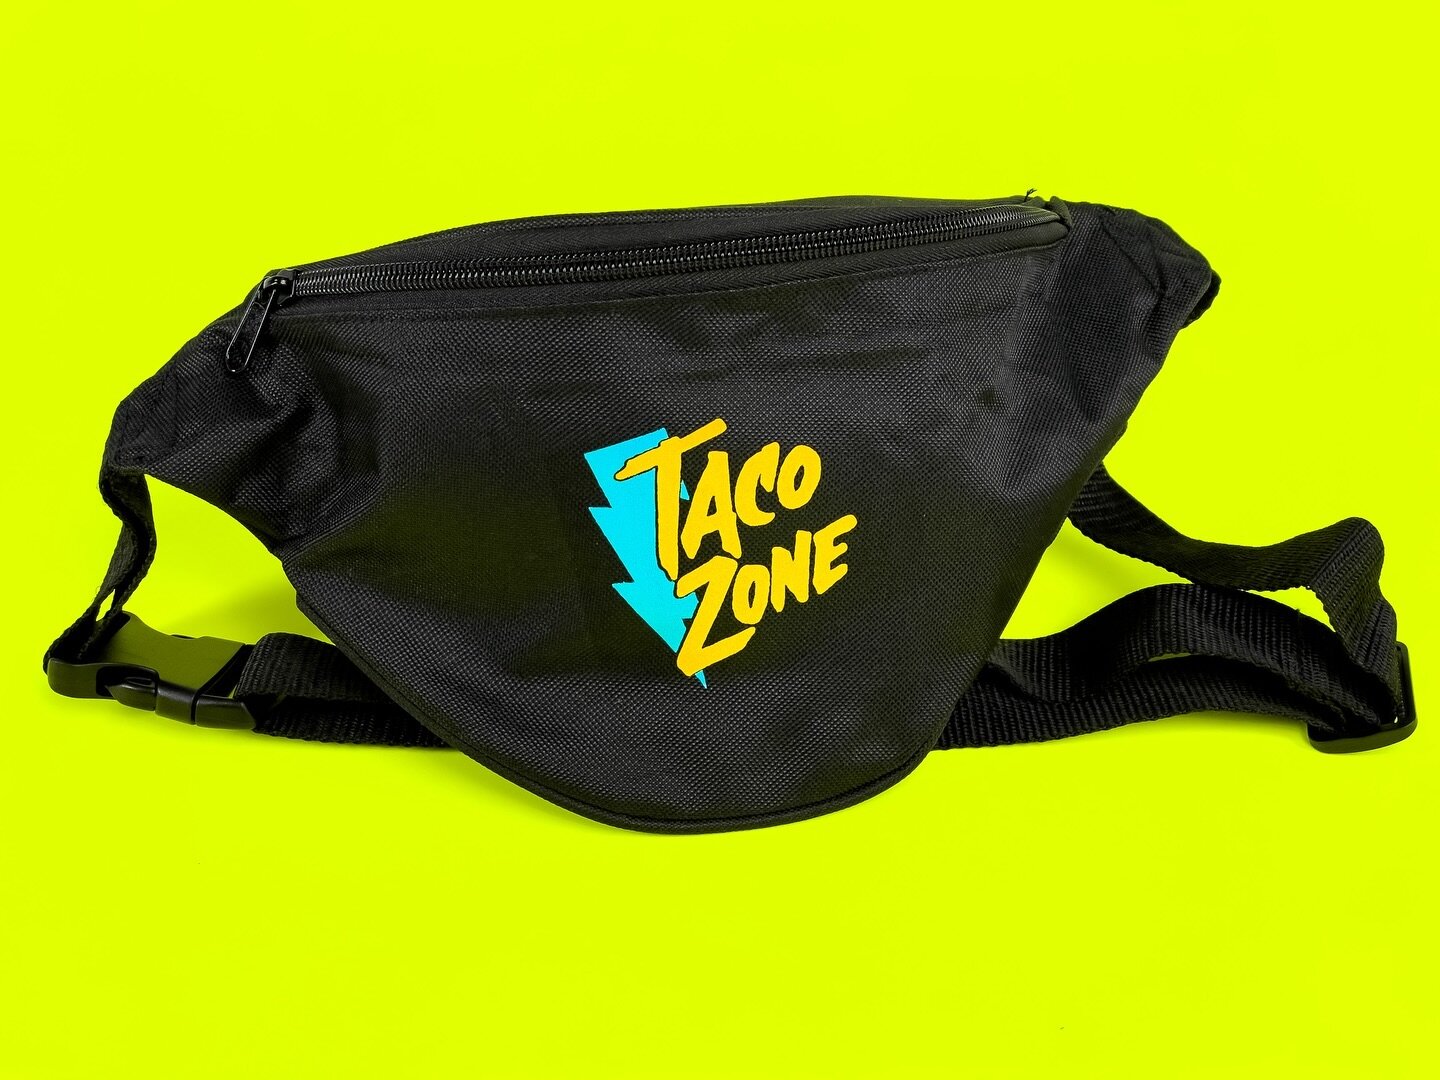 Imagine carrying around three delicious tacos INSIDE this bad boy&hellip;

You can make your dreams come to life, we still@have a few of these available at the shop. Get your tacos to go in style!

Get in the Zone ⚡️✨⚡️